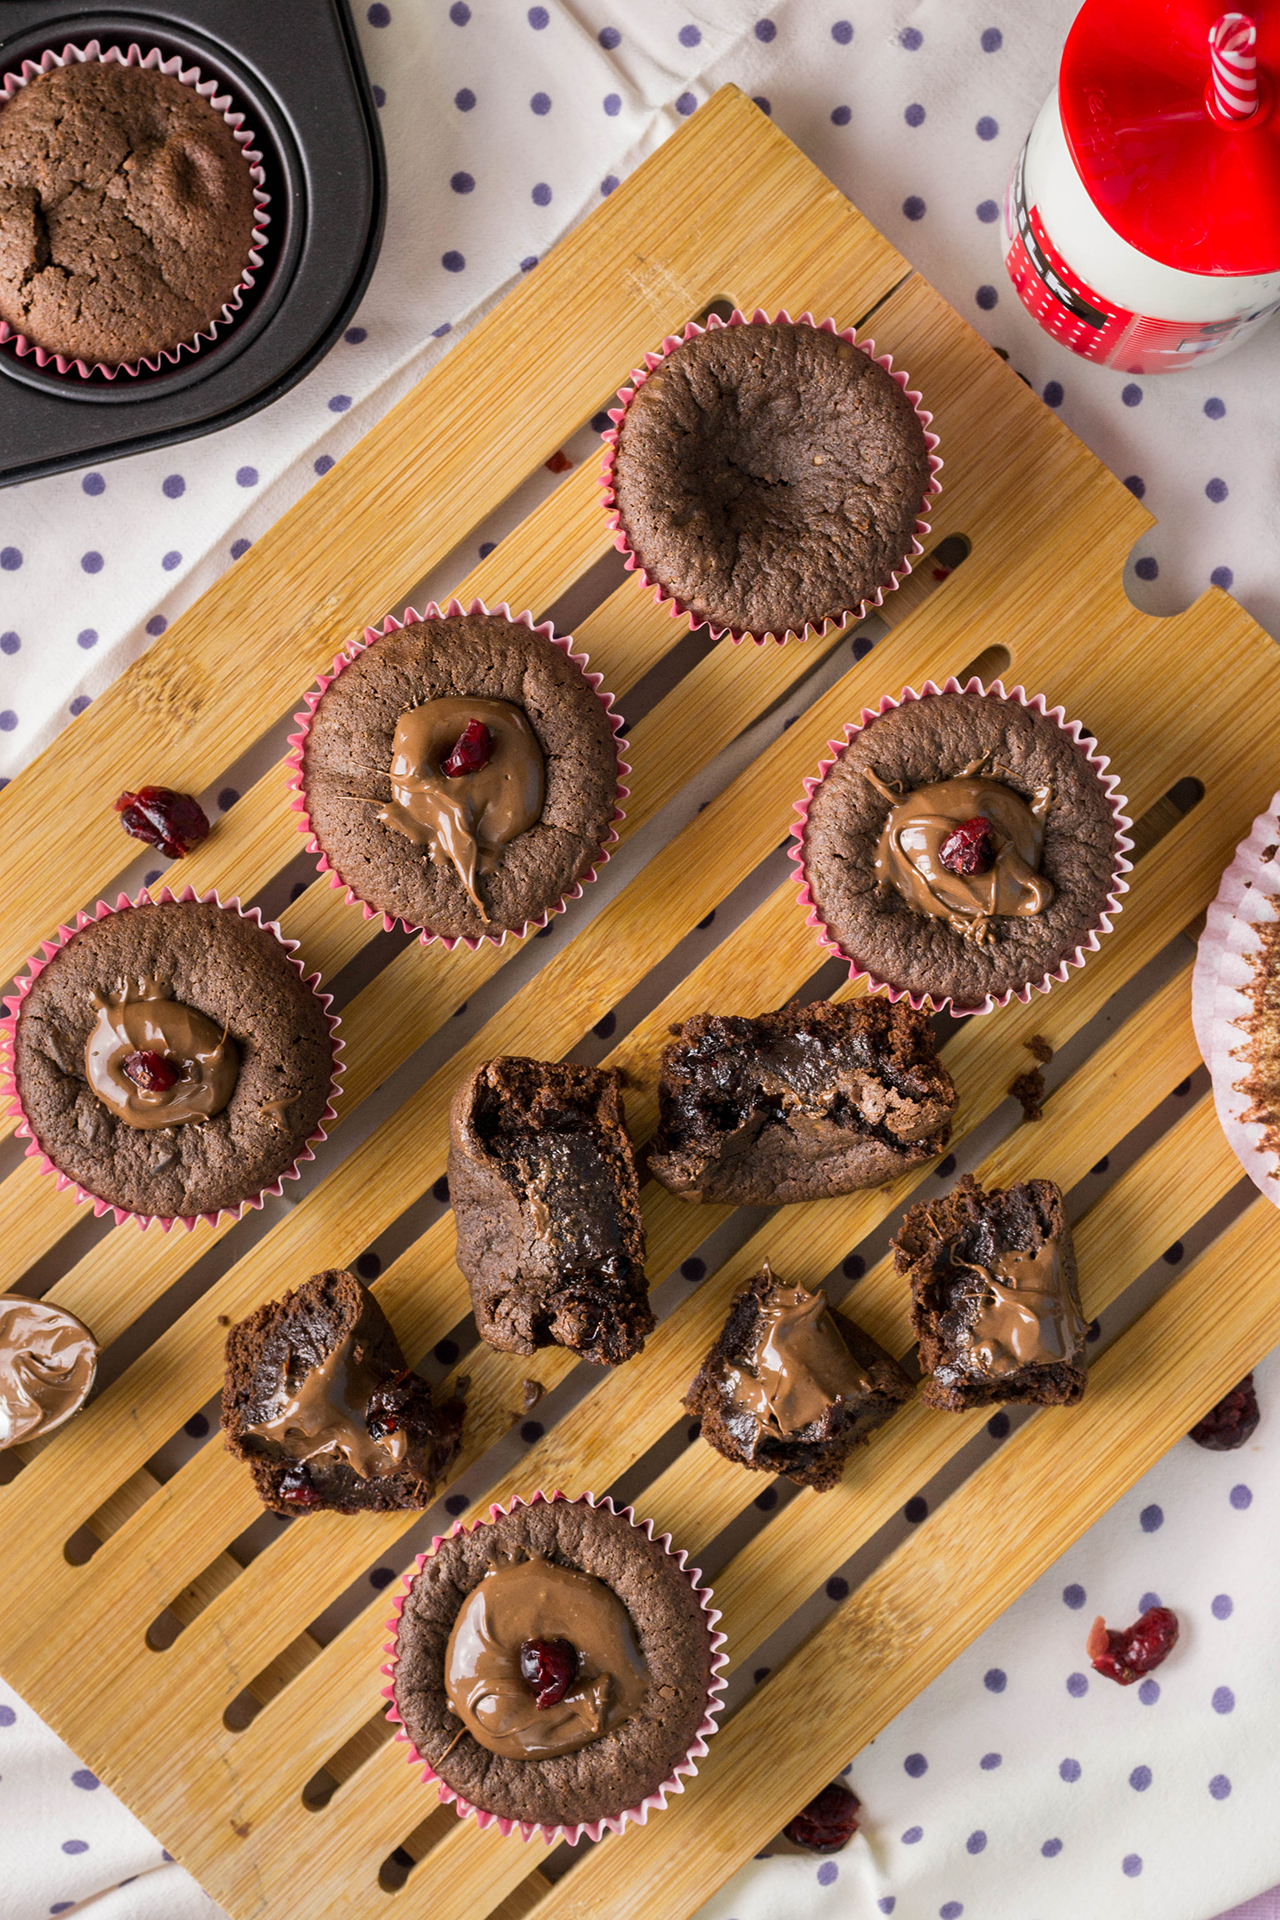 Cranberry Nutella muffins. The sweetest muffins ever!